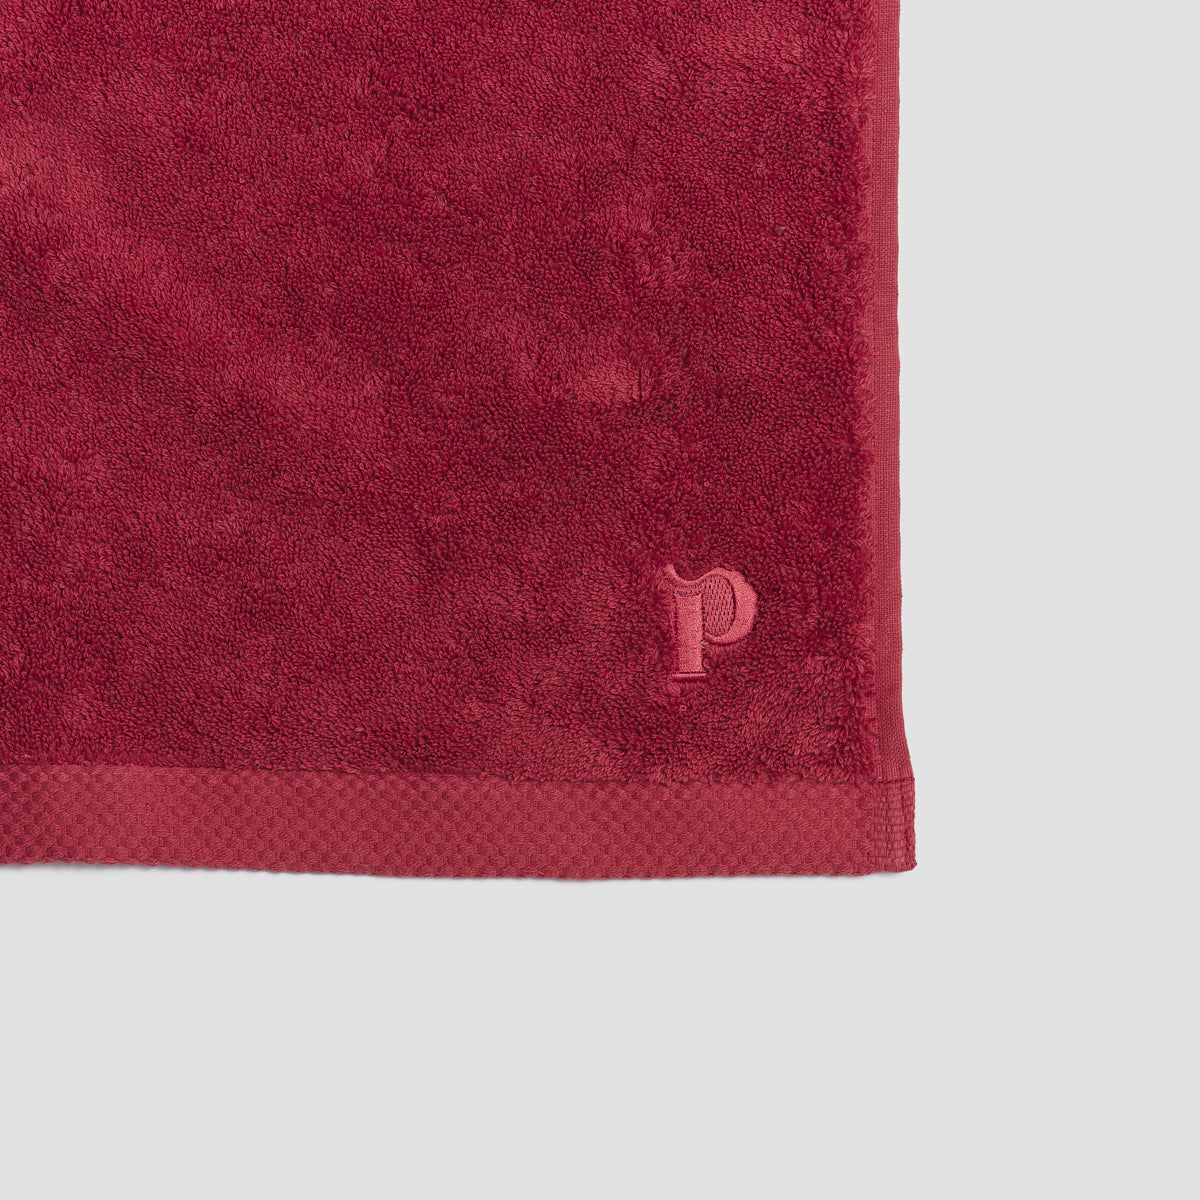 Mineral Red Organic Cotton Towel featuring embroidered logo